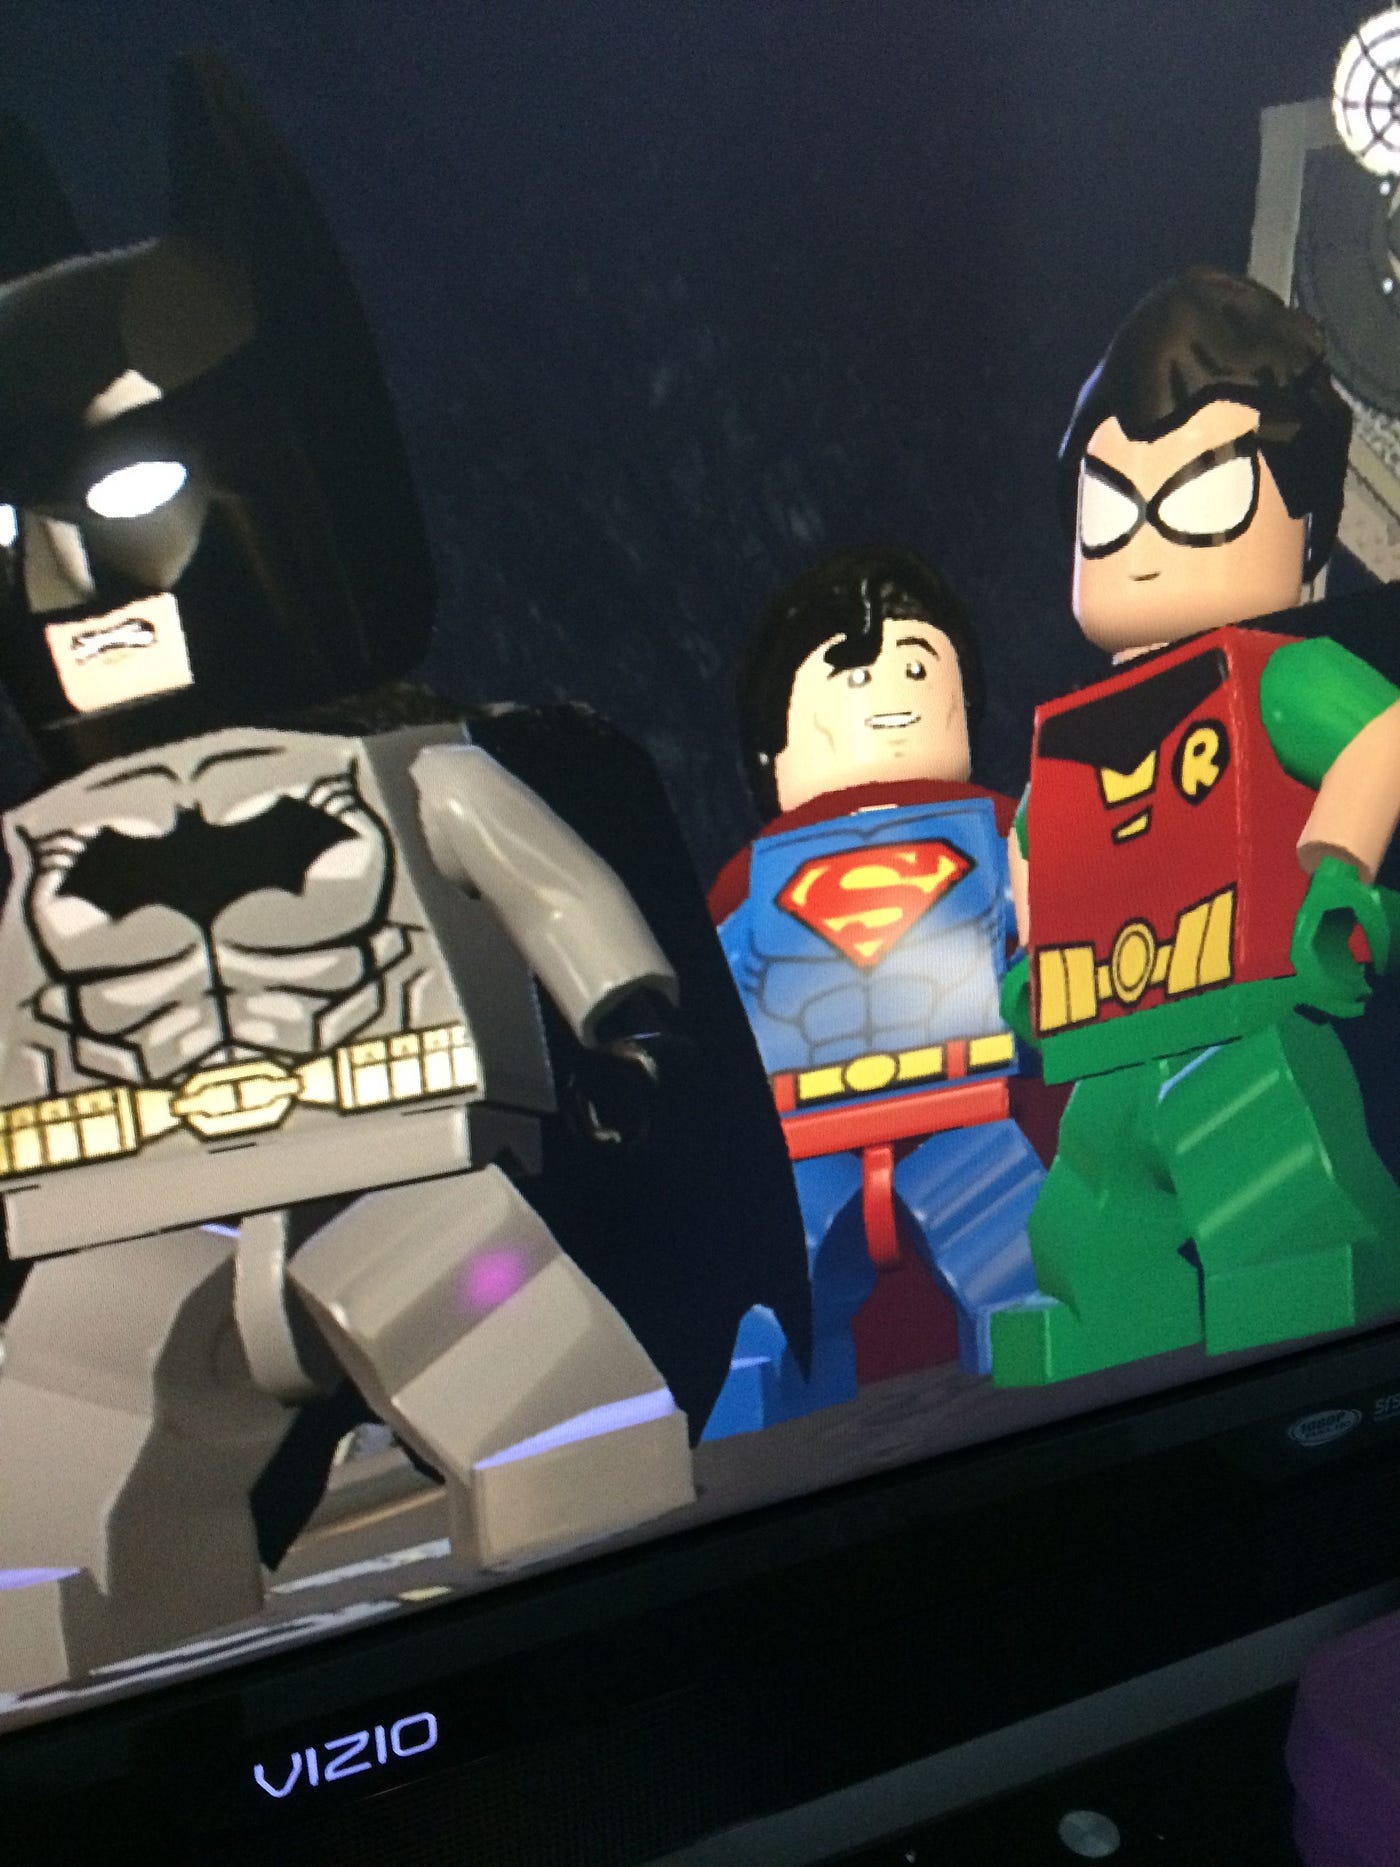 What do you want to see in the rumored LEGO Batman 4? : r/legogaming